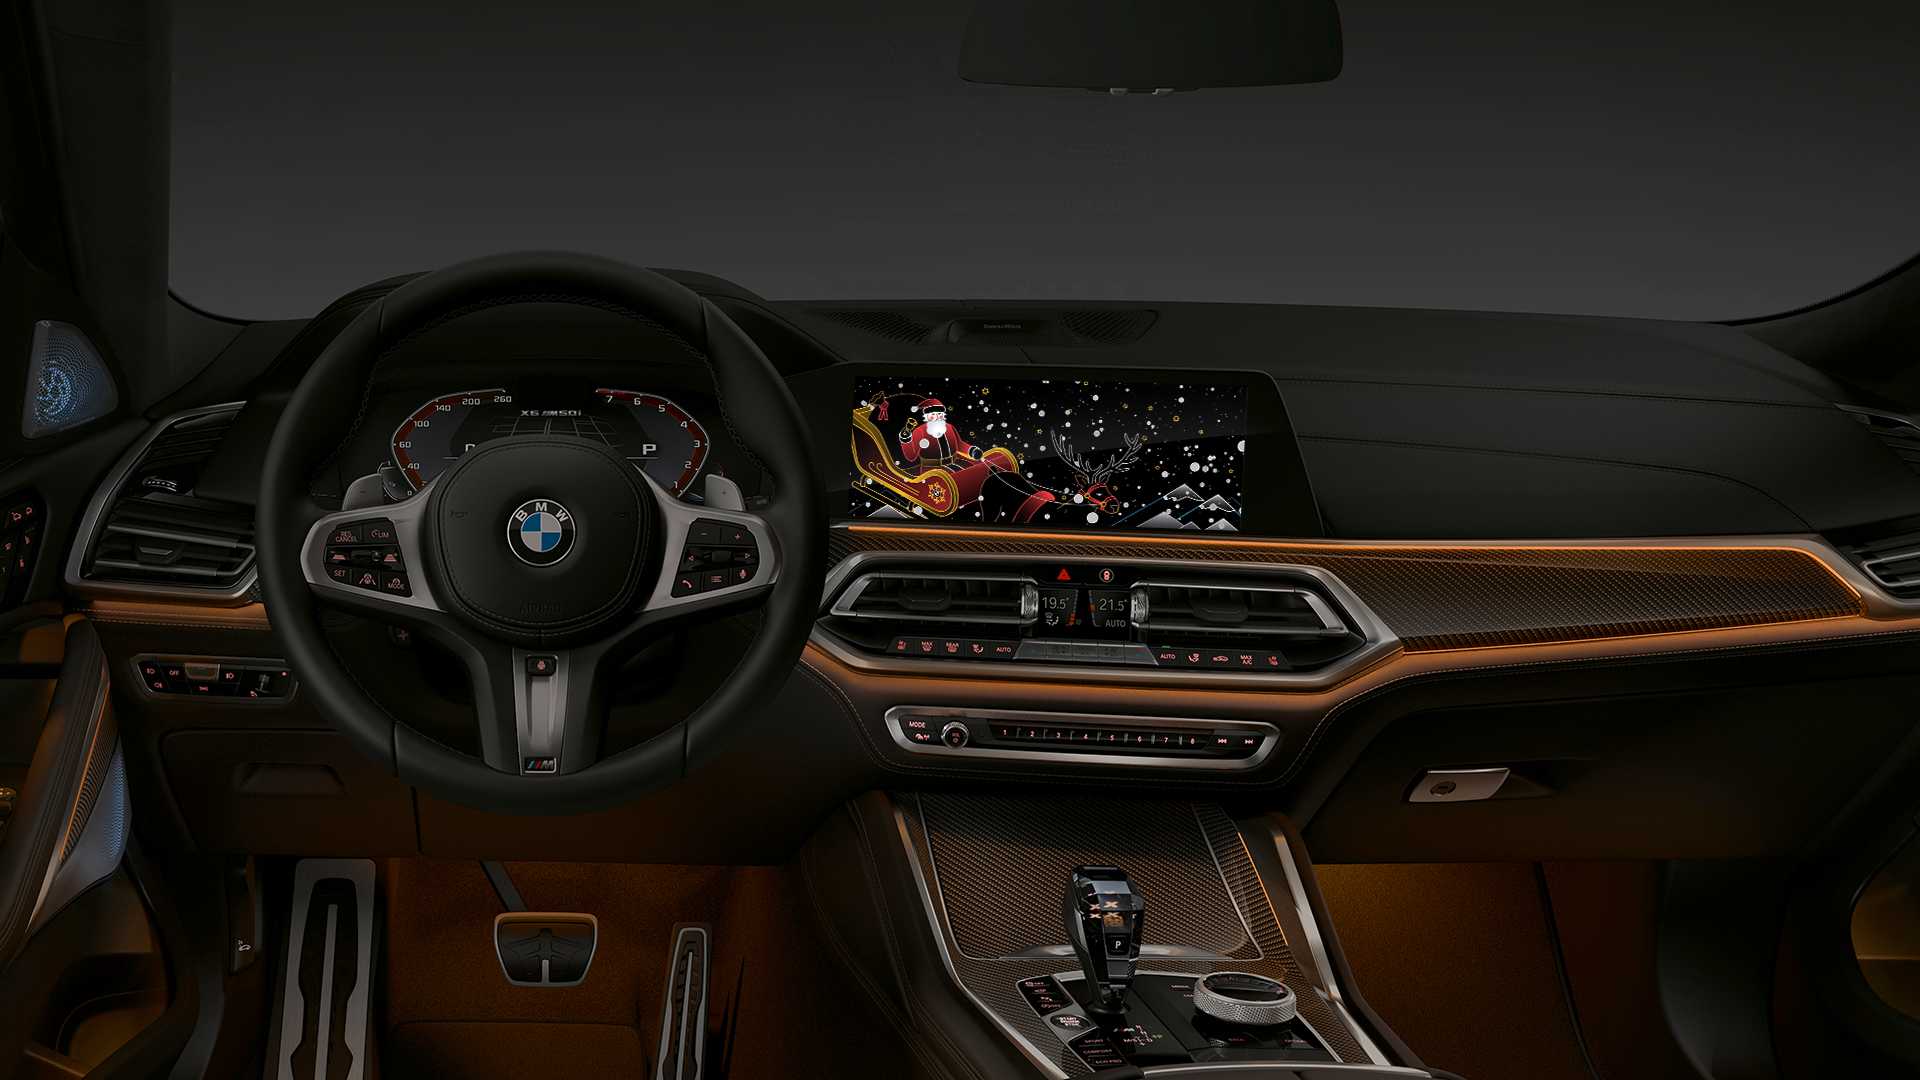 Now Your Bmw Can Join In The Festive Celebrations